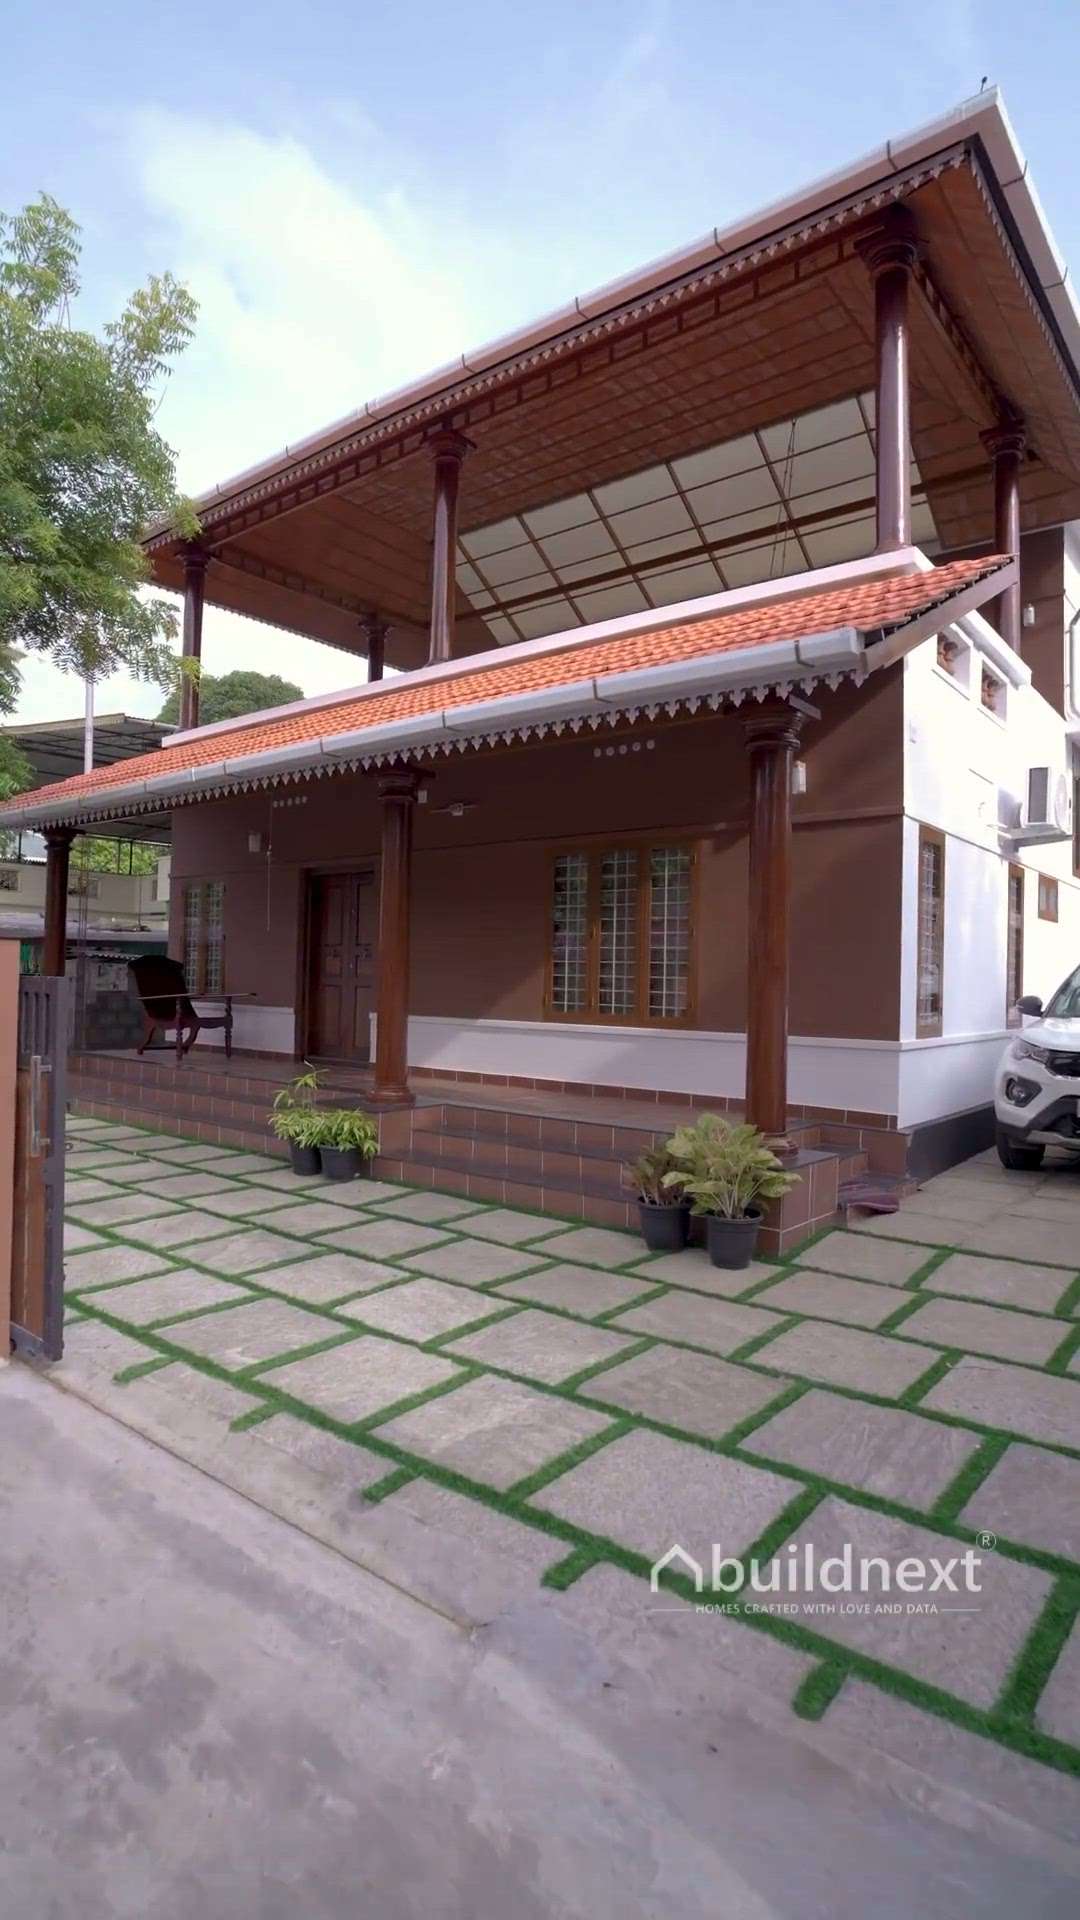 Step into a world where simplicity and earthy tones converge, creating warm and inviting spaces of utmost comfort. This residence embodies the elegance of Kerala architecture, blending seamlessly with earthy textures to offer a haven of tranquility and rootedness. Every corner invites you to relax, unwind, and immerse yourself in the soothing embrace of Kerala’s warm and inviting ambiance.

Location: Chalakudi, Kerala
Area: 2500 Sq. Ft

#BuildNextHomes #keralahomes #traditionalhome #keralahomedesign #housedesign #houseconstruction #homebuilder @keralahomeplanners @kolo.kerala #decorshopping